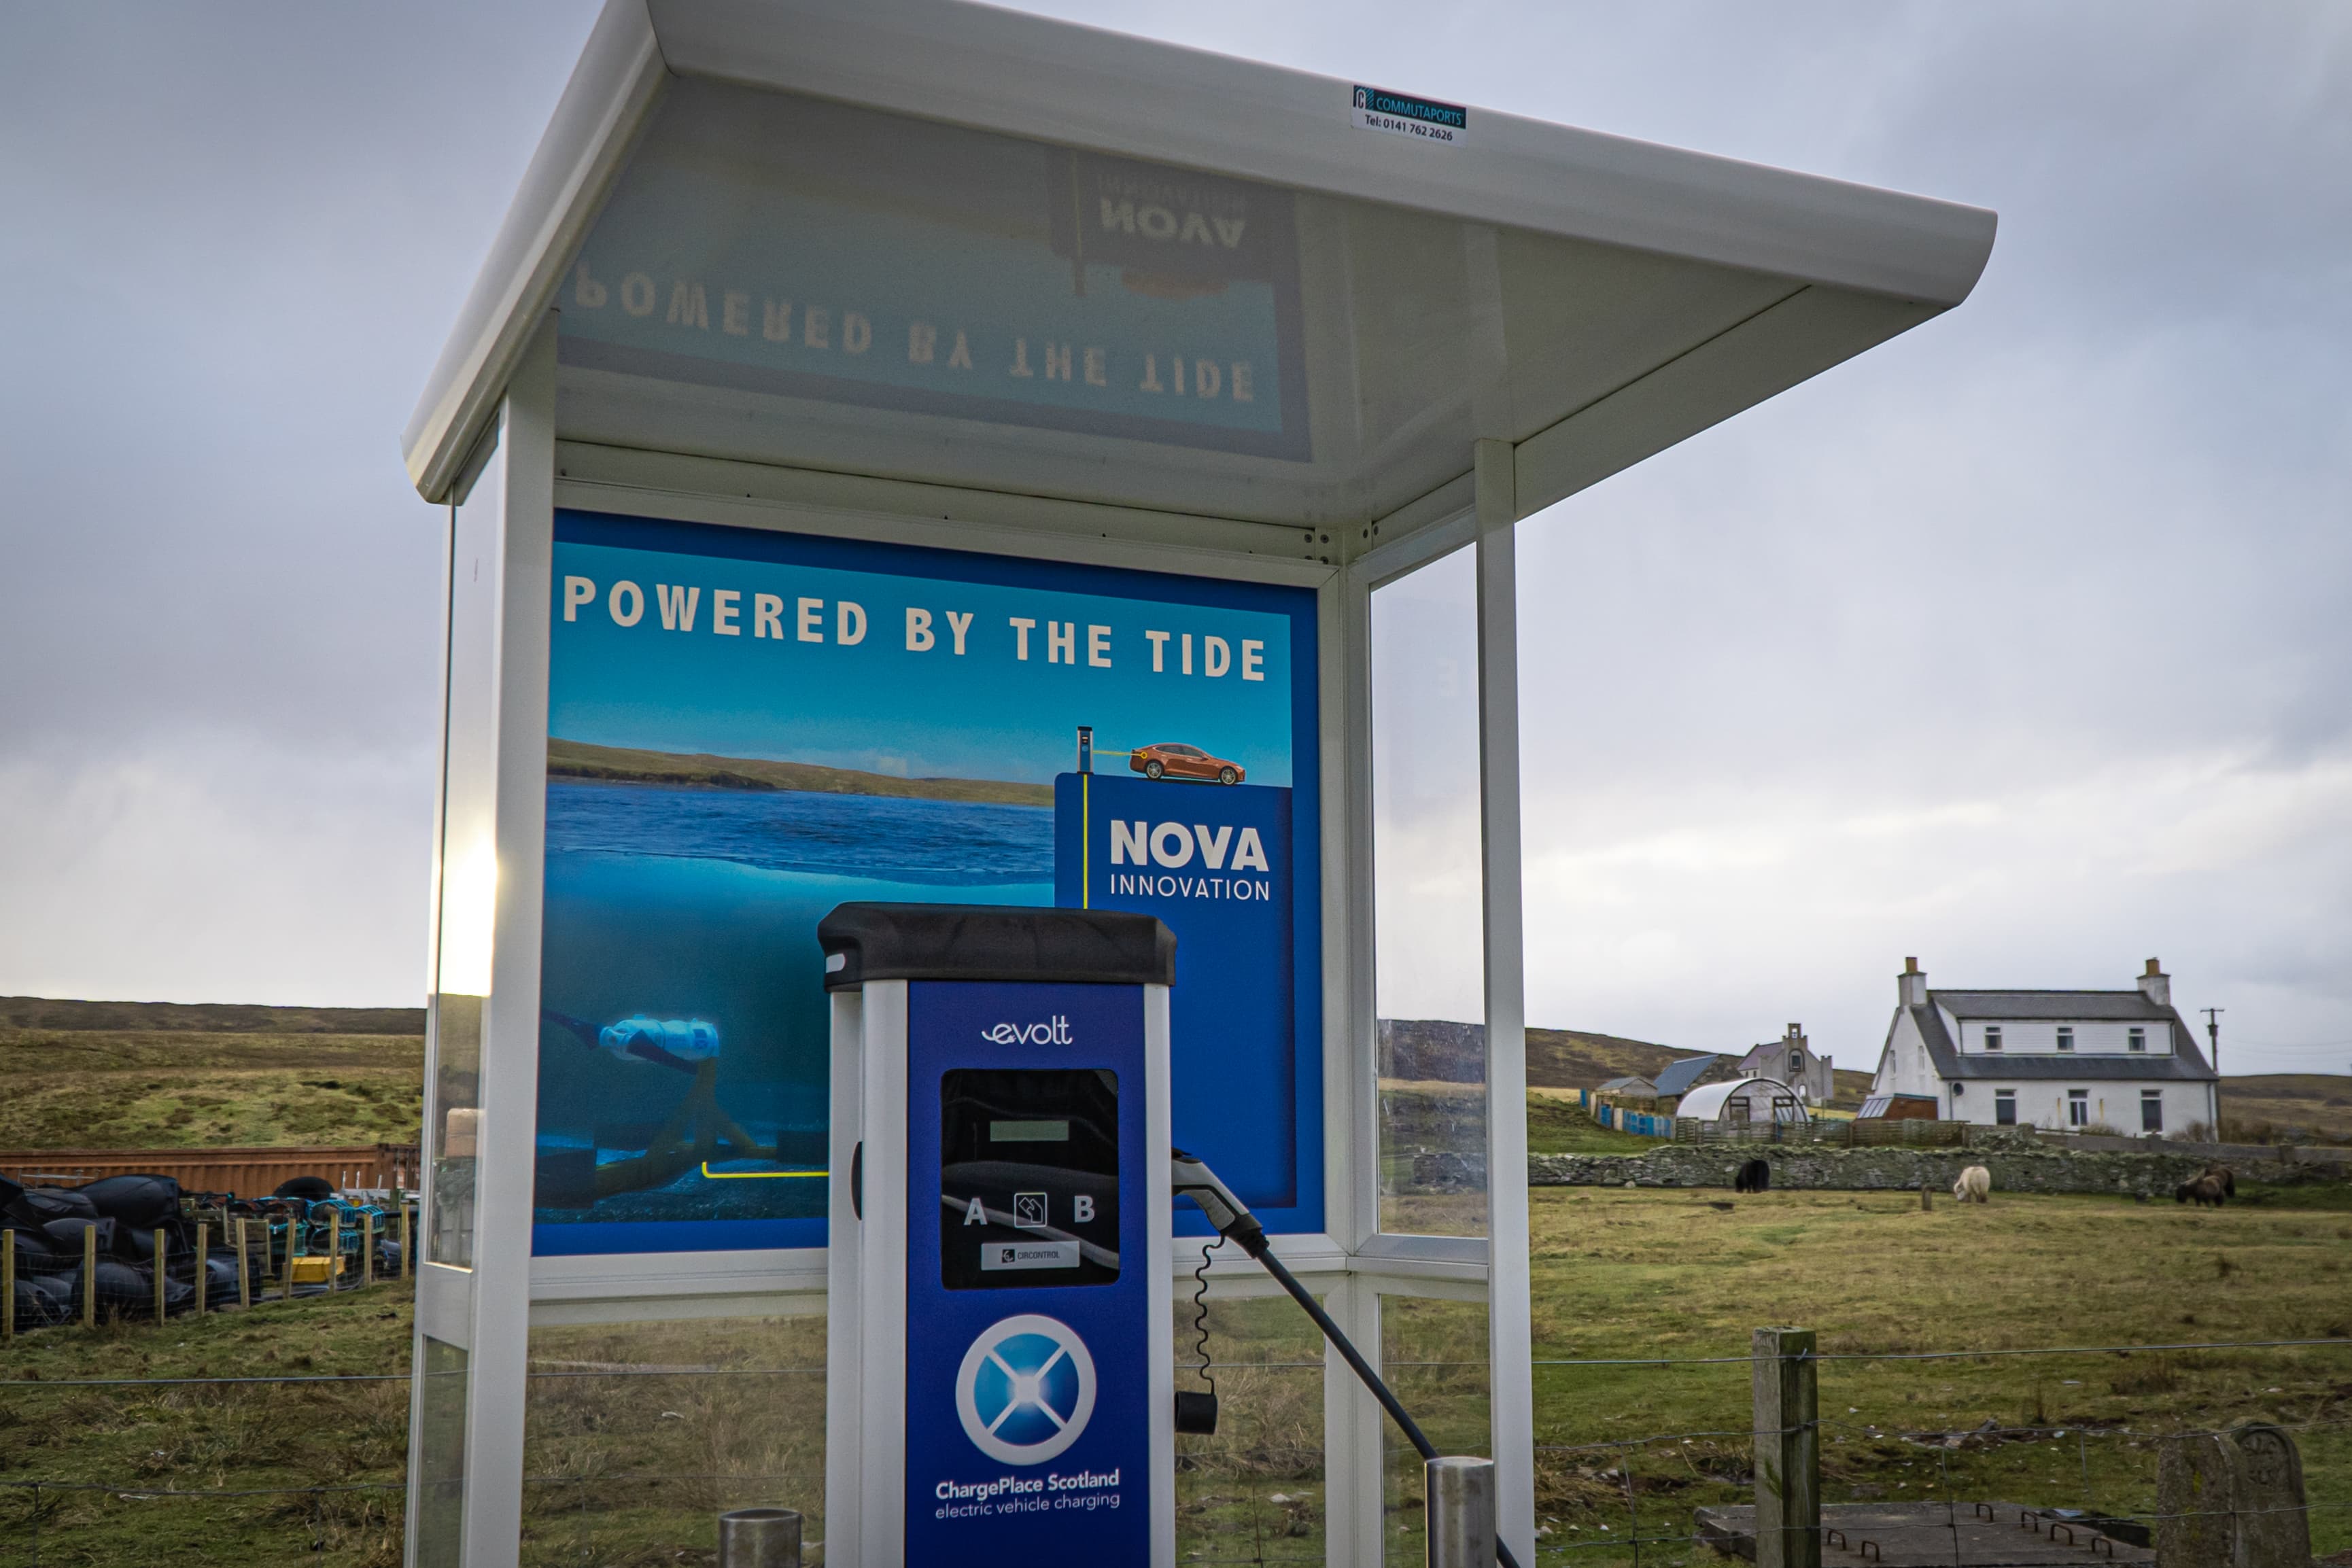 On an island north of Scotland, tidal power is providing juice for electric vehicles